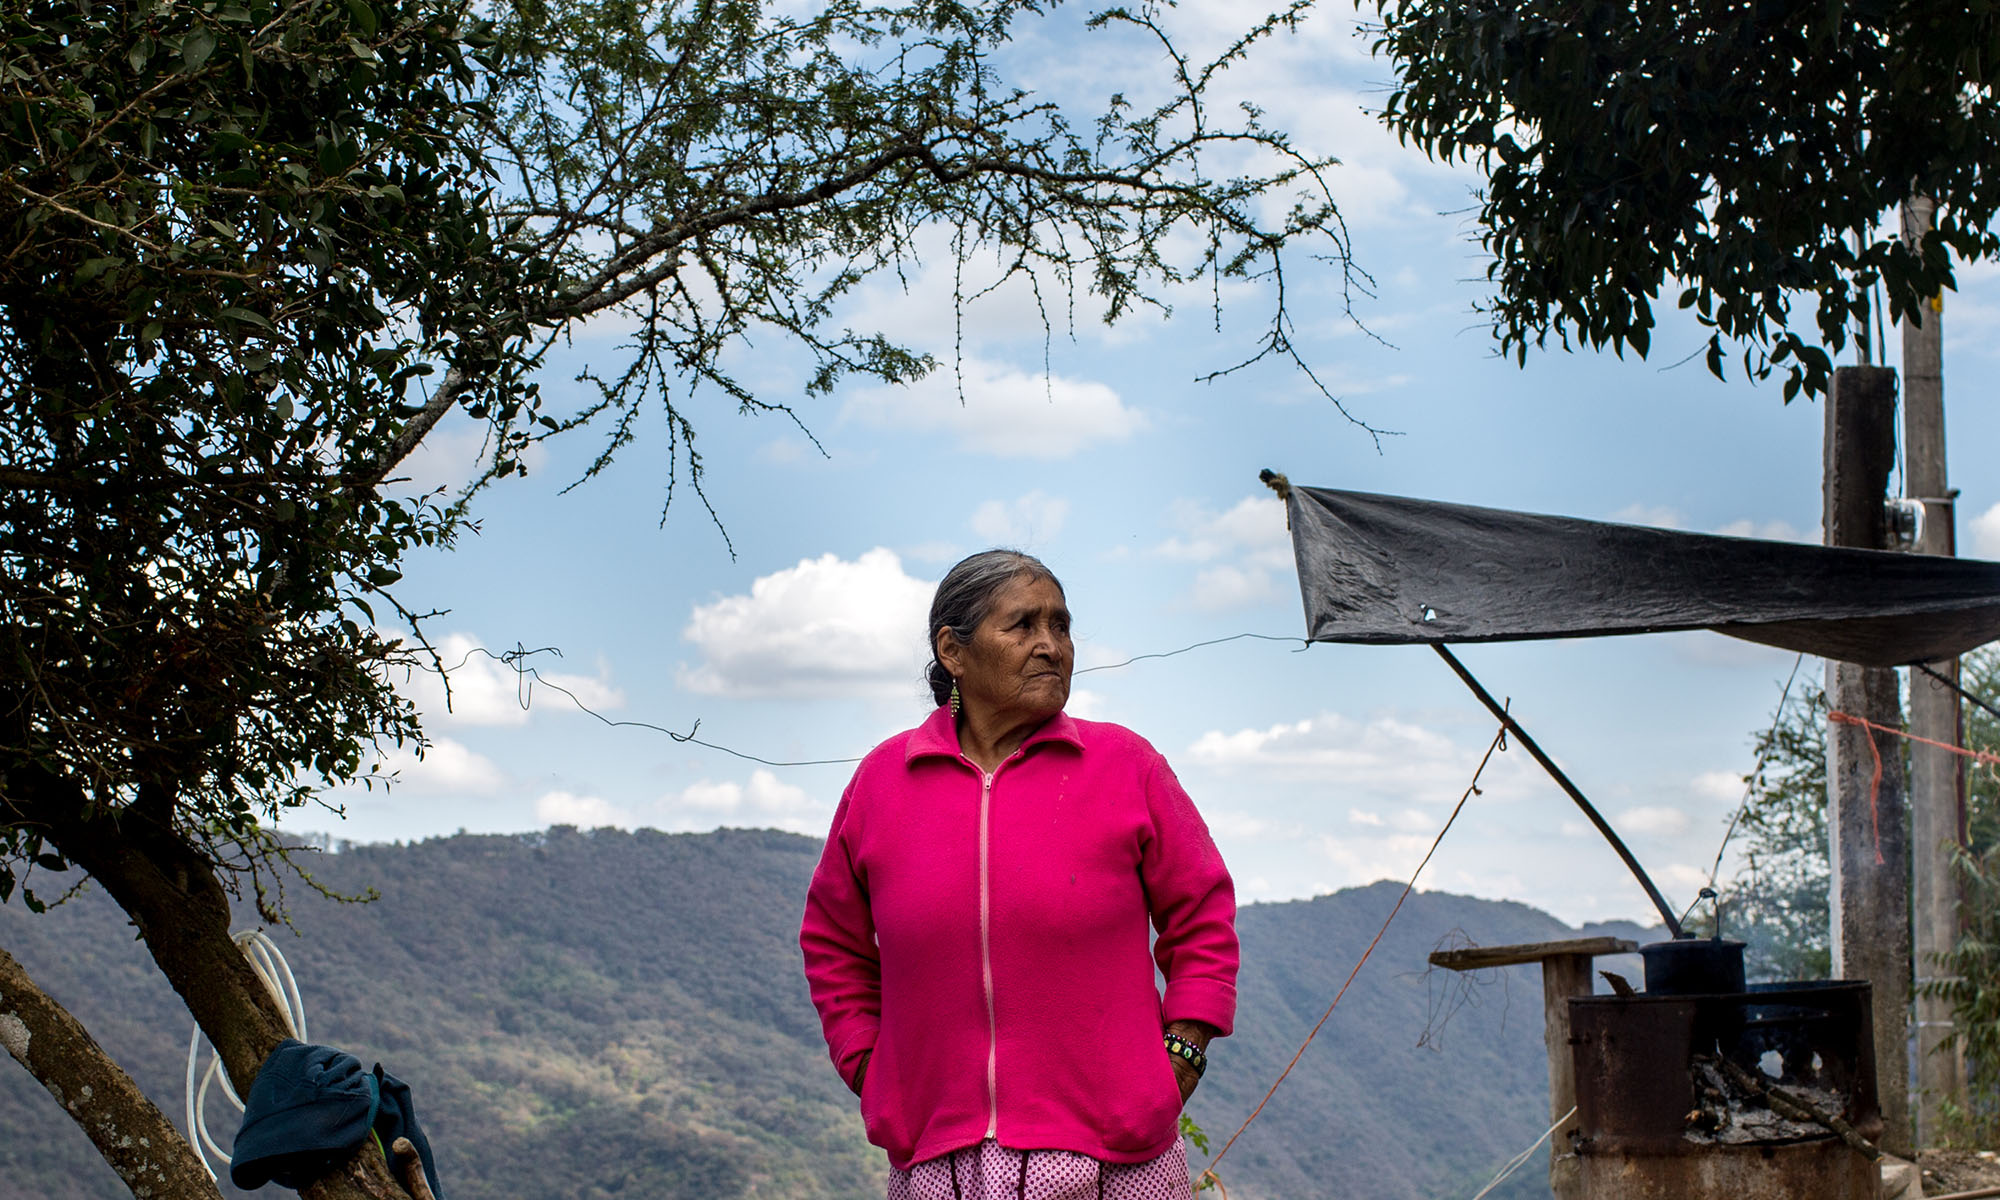 Mendoza stands by the stove outside her home overlooking the Sierra Gorda Biosphere Reserve. Her granddaughter, who she has not seen in 15 years, sends her money from the U.S. where she now has five grandchildren. She worries about them since Trump’s election and his statements on undocumented immigrants and remittances. “Only God can watch over them. We are waiting to see if they will be deported. Right now they aren’t safe over there, the poor things,” she said. (Photo by Courtney Pedroza/Cronkite Borderlands Initiative)